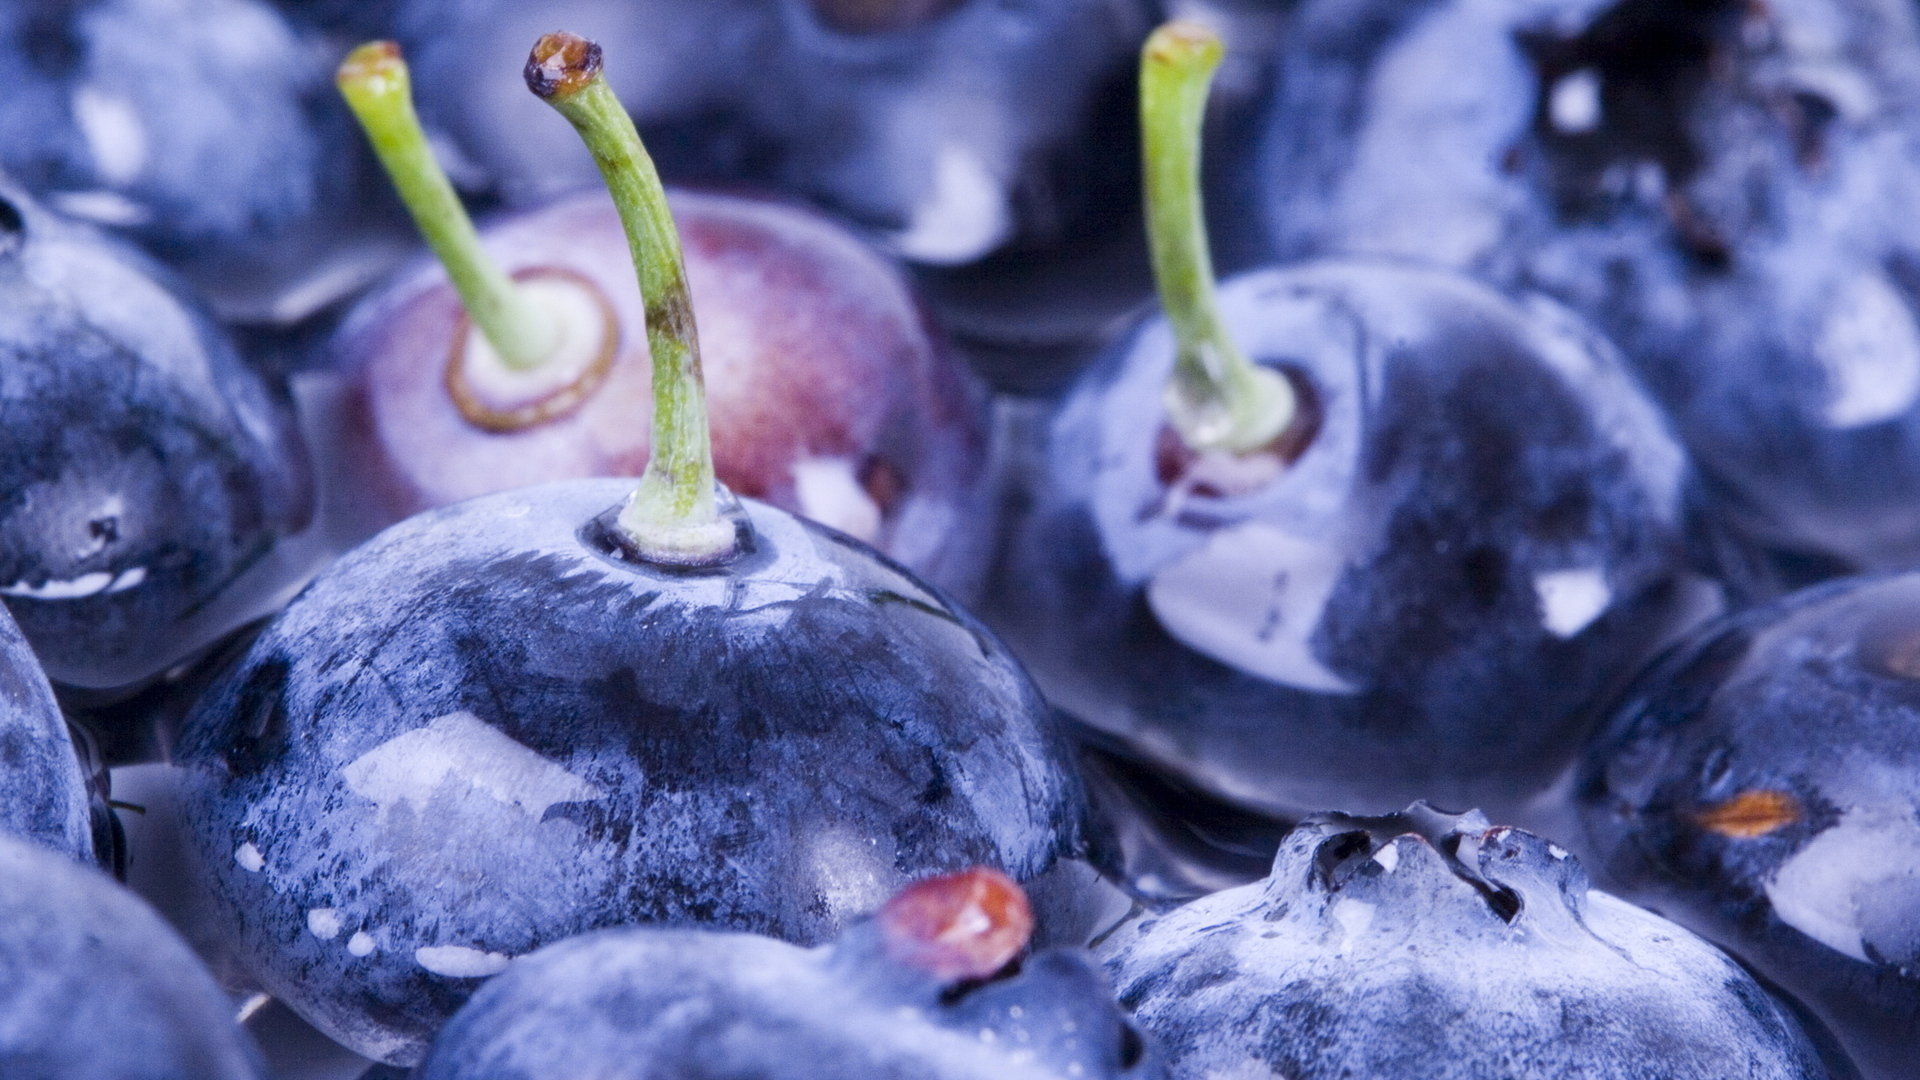 Download full hd 1080p Blueberry computer wallpaper ID:69057 for free